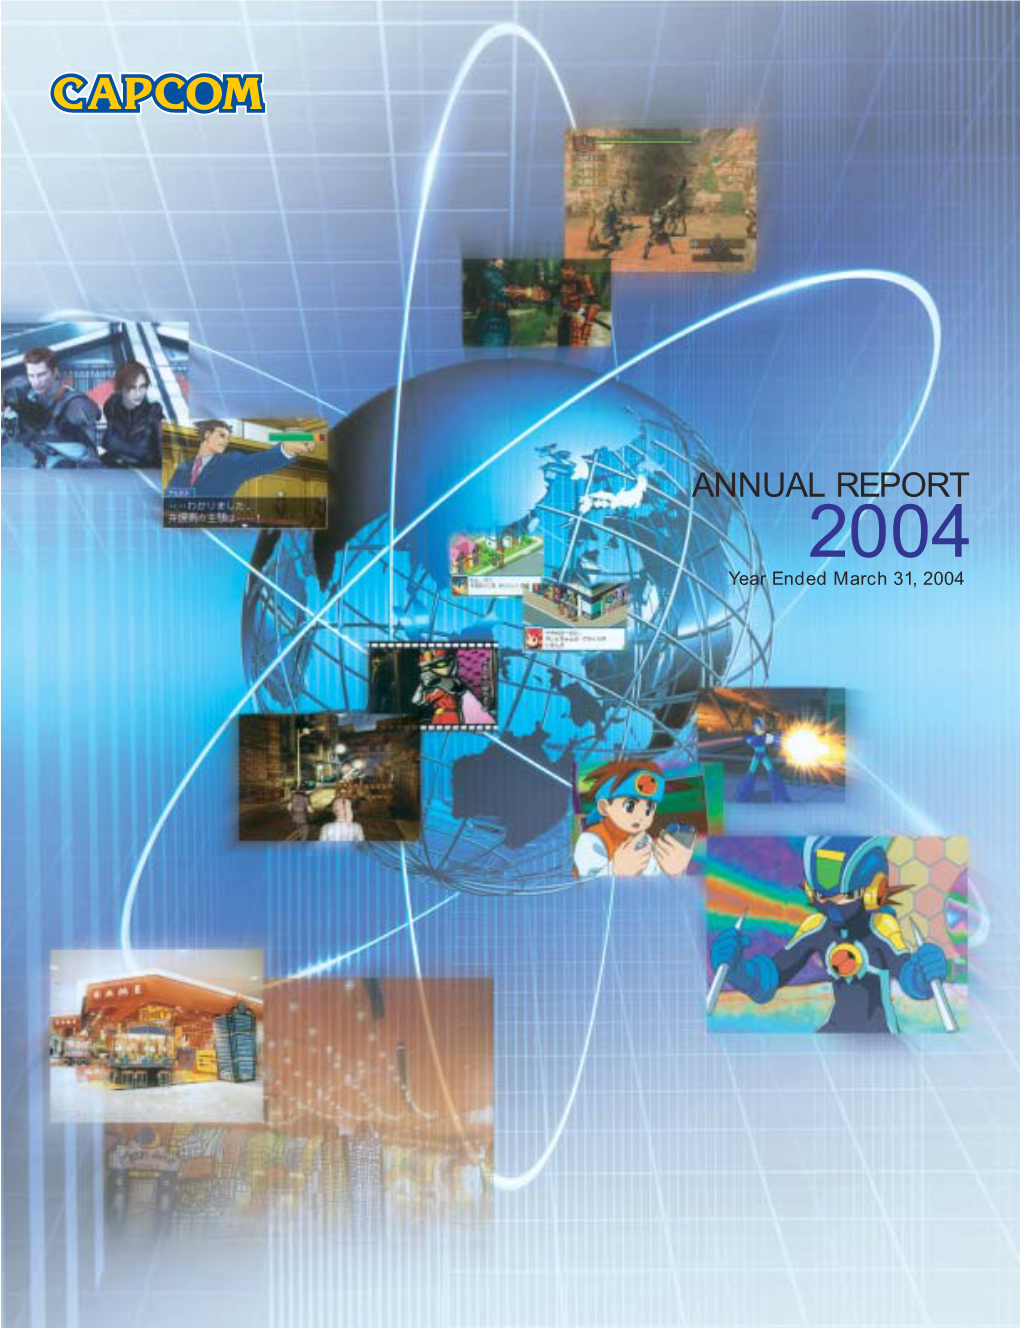 ANNUAL REPORT 2004 Year Ended March 31, 2004 Profile Capcom’S Core Business Is Developing and Distributing Home Video Game Software